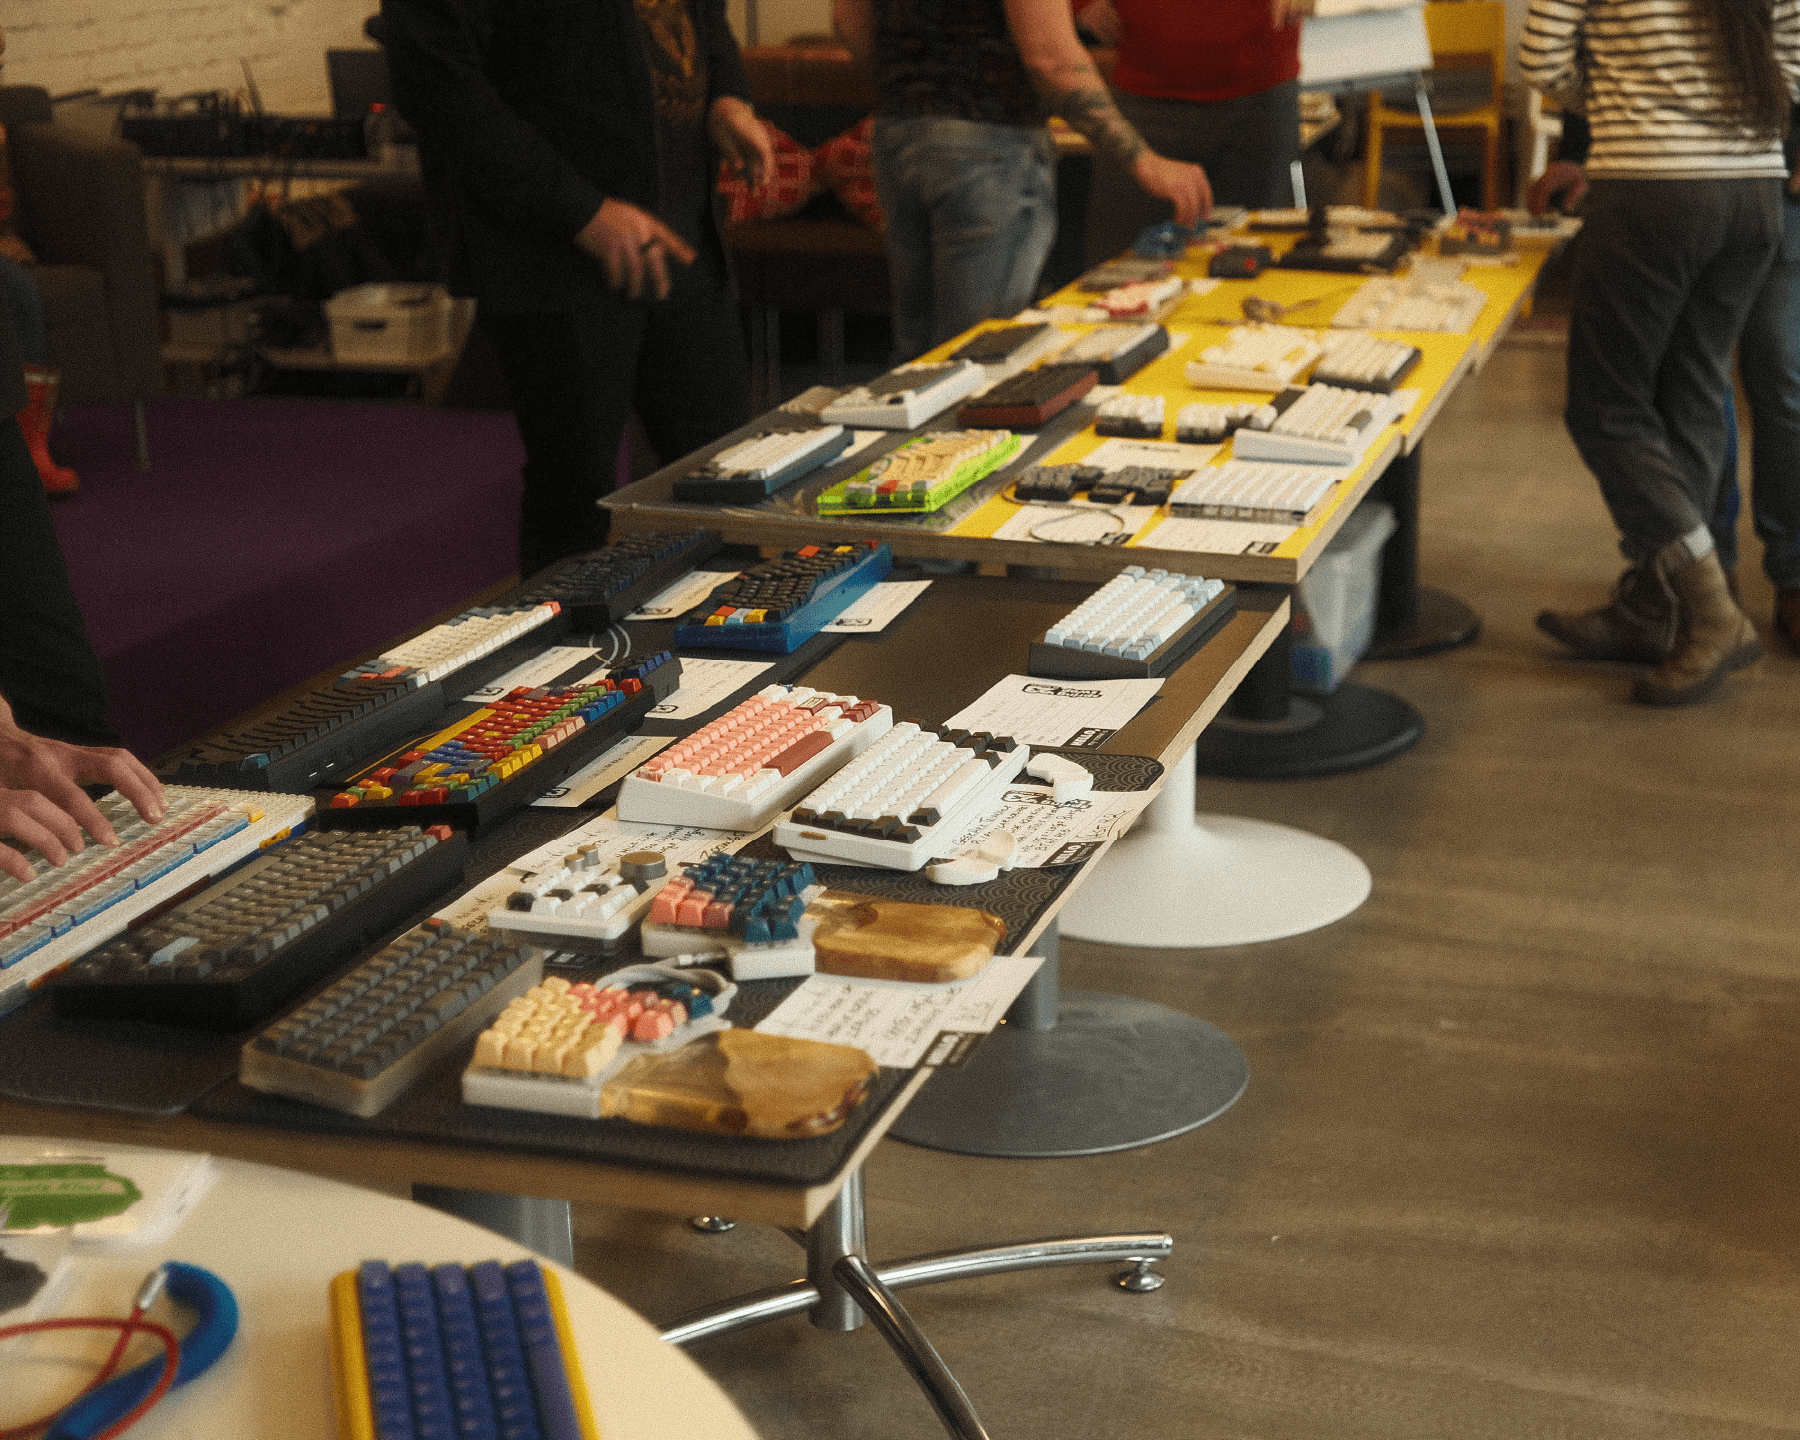 Third meetup, overview of the keyboards on the table